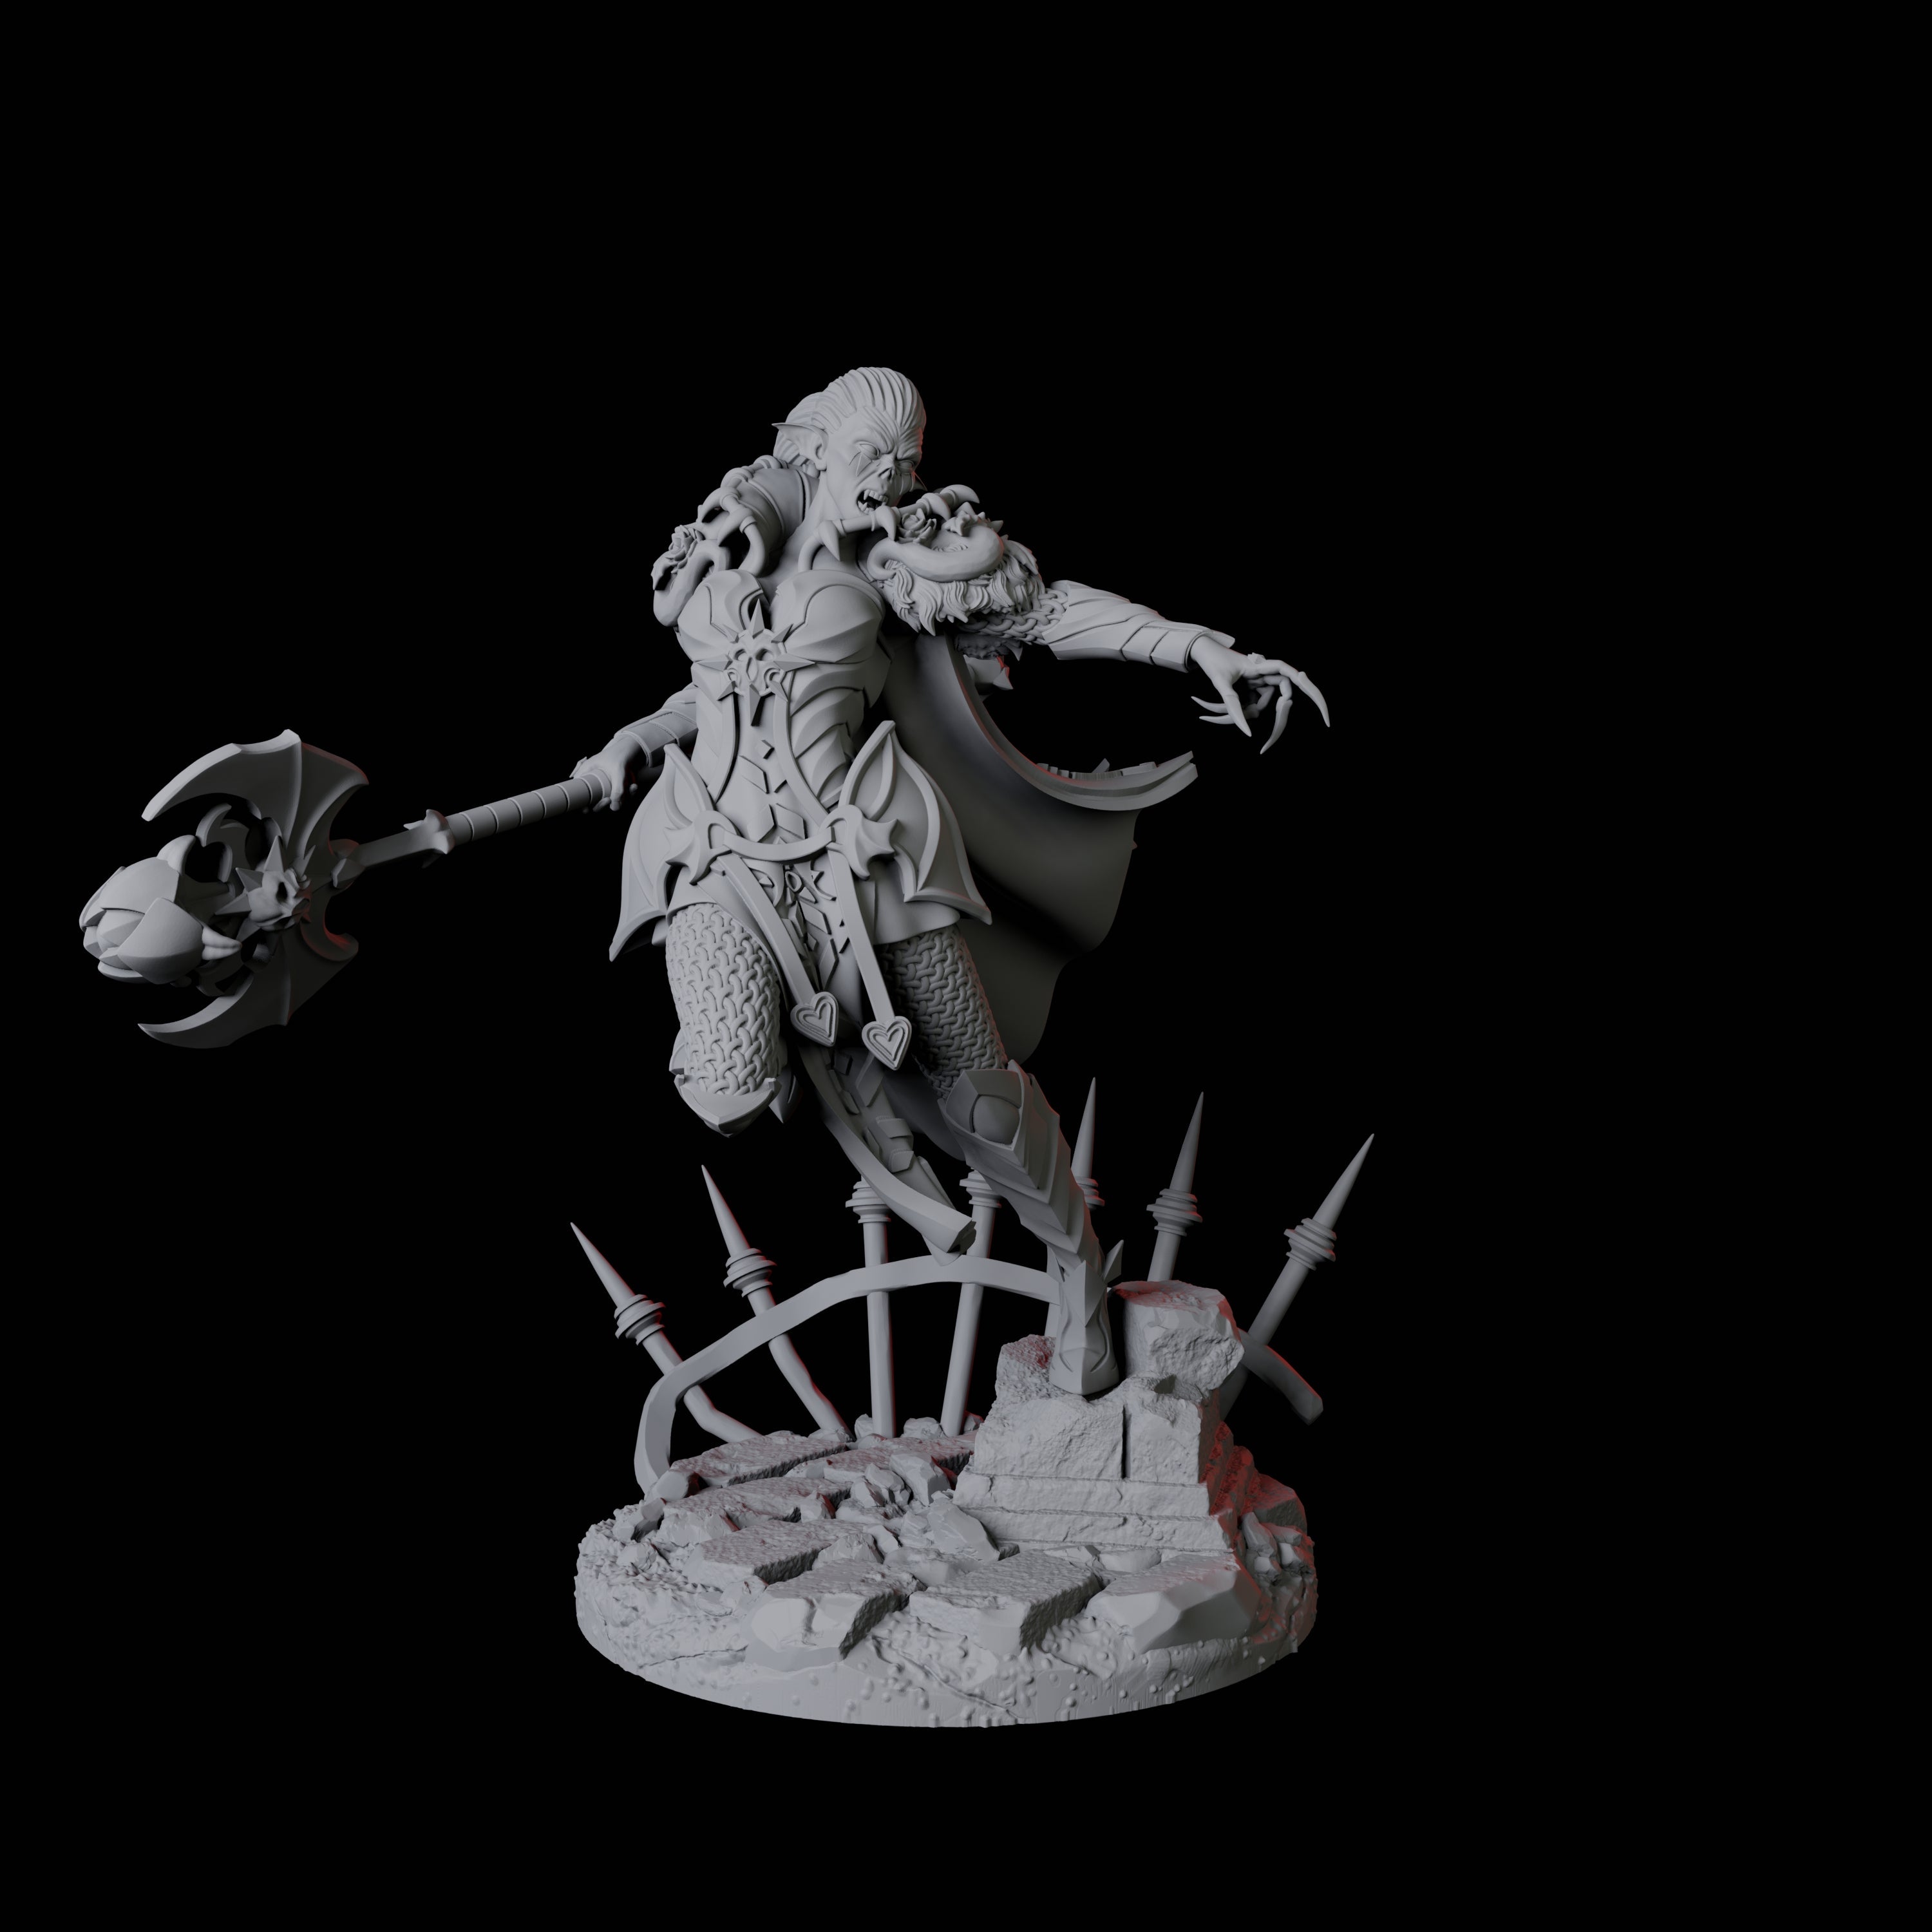 Vampire Warrior B Miniature for Dungeons and Dragons, Pathfinder or other TTRPGs